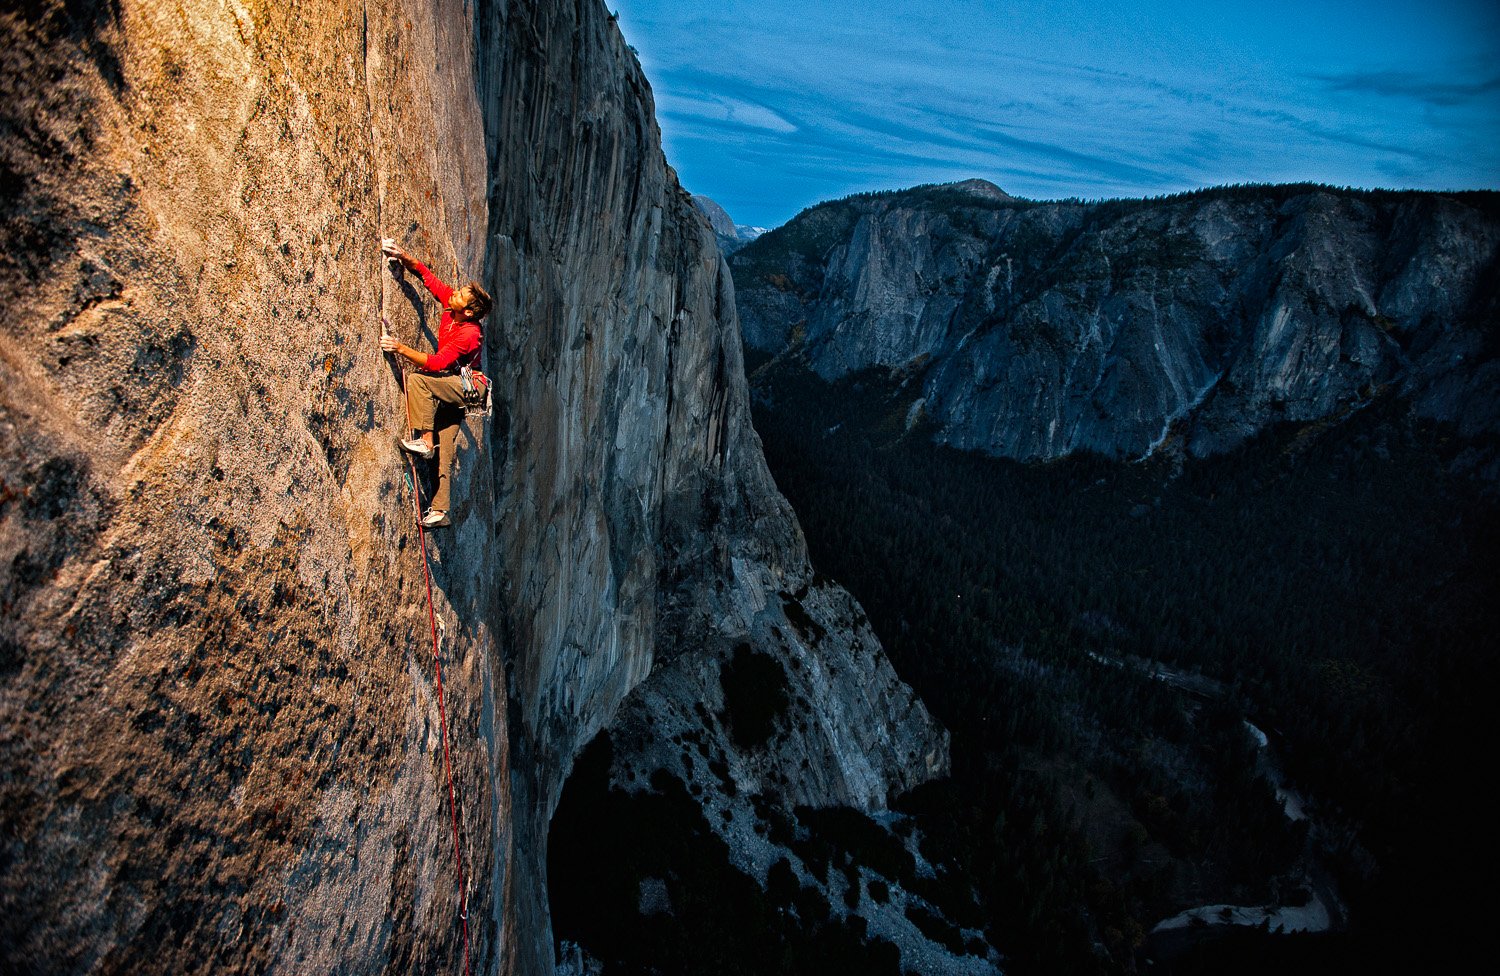 Kevin Jorgeson Climbing the Dawn Wall - Jimmy Chin